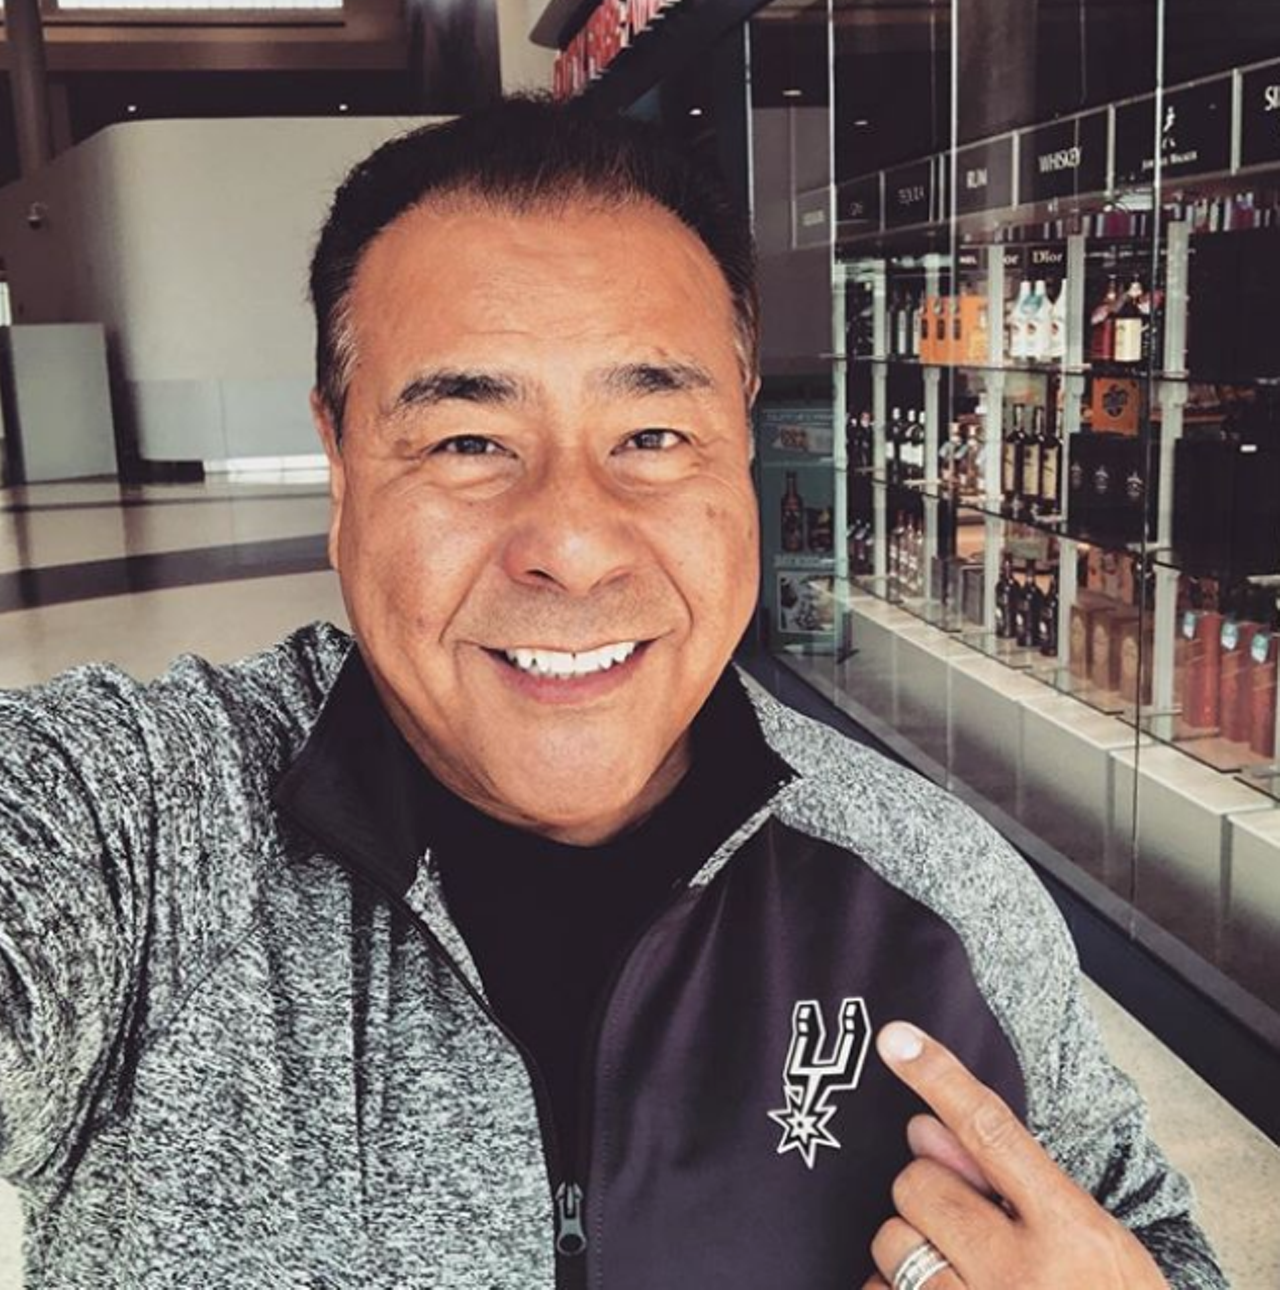 John Quiñones
After growing up in San Antonio (though his family were sometimes migrant workers), John Quiñones attended St. Mary’s University. As an undergraduate, he studied speech communication and was a member of the Sigma Beta-Zeta of the Lambda Chi Alpha fraternity. Today, TV viewers can catch Quiñones as the host of What Would You Do? on ABC.
Photo via Instagram / johnquinones